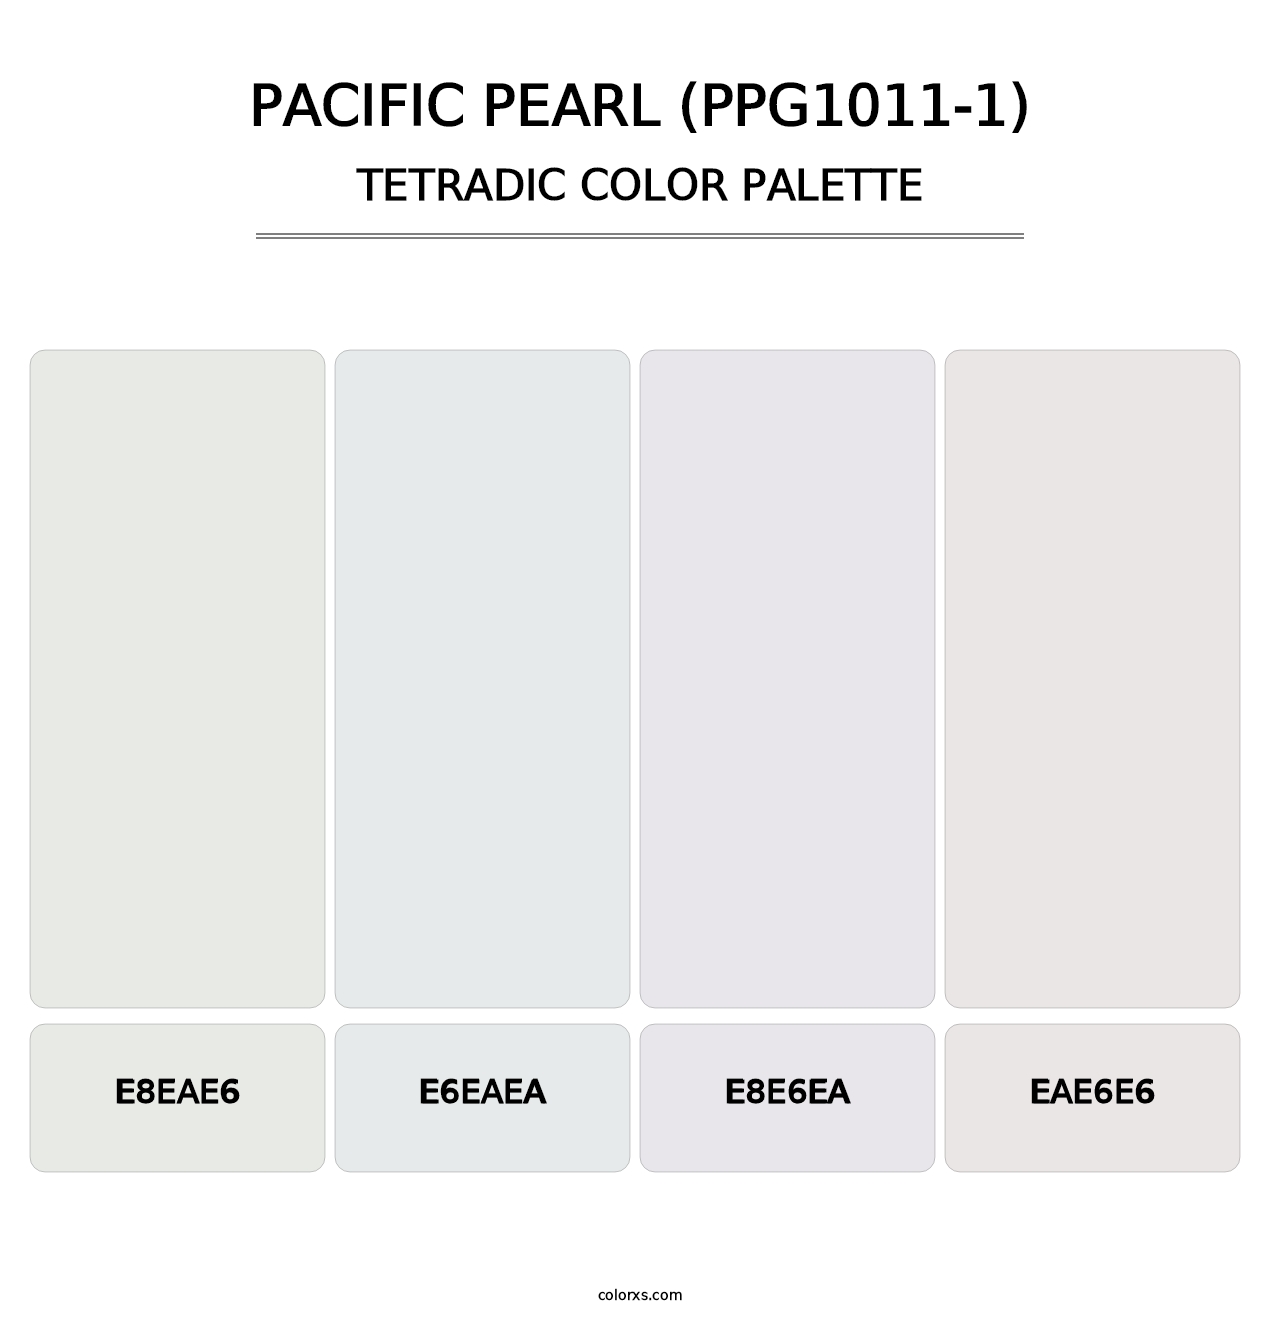 Pacific Pearl (PPG1011-1) - Tetradic Color Palette